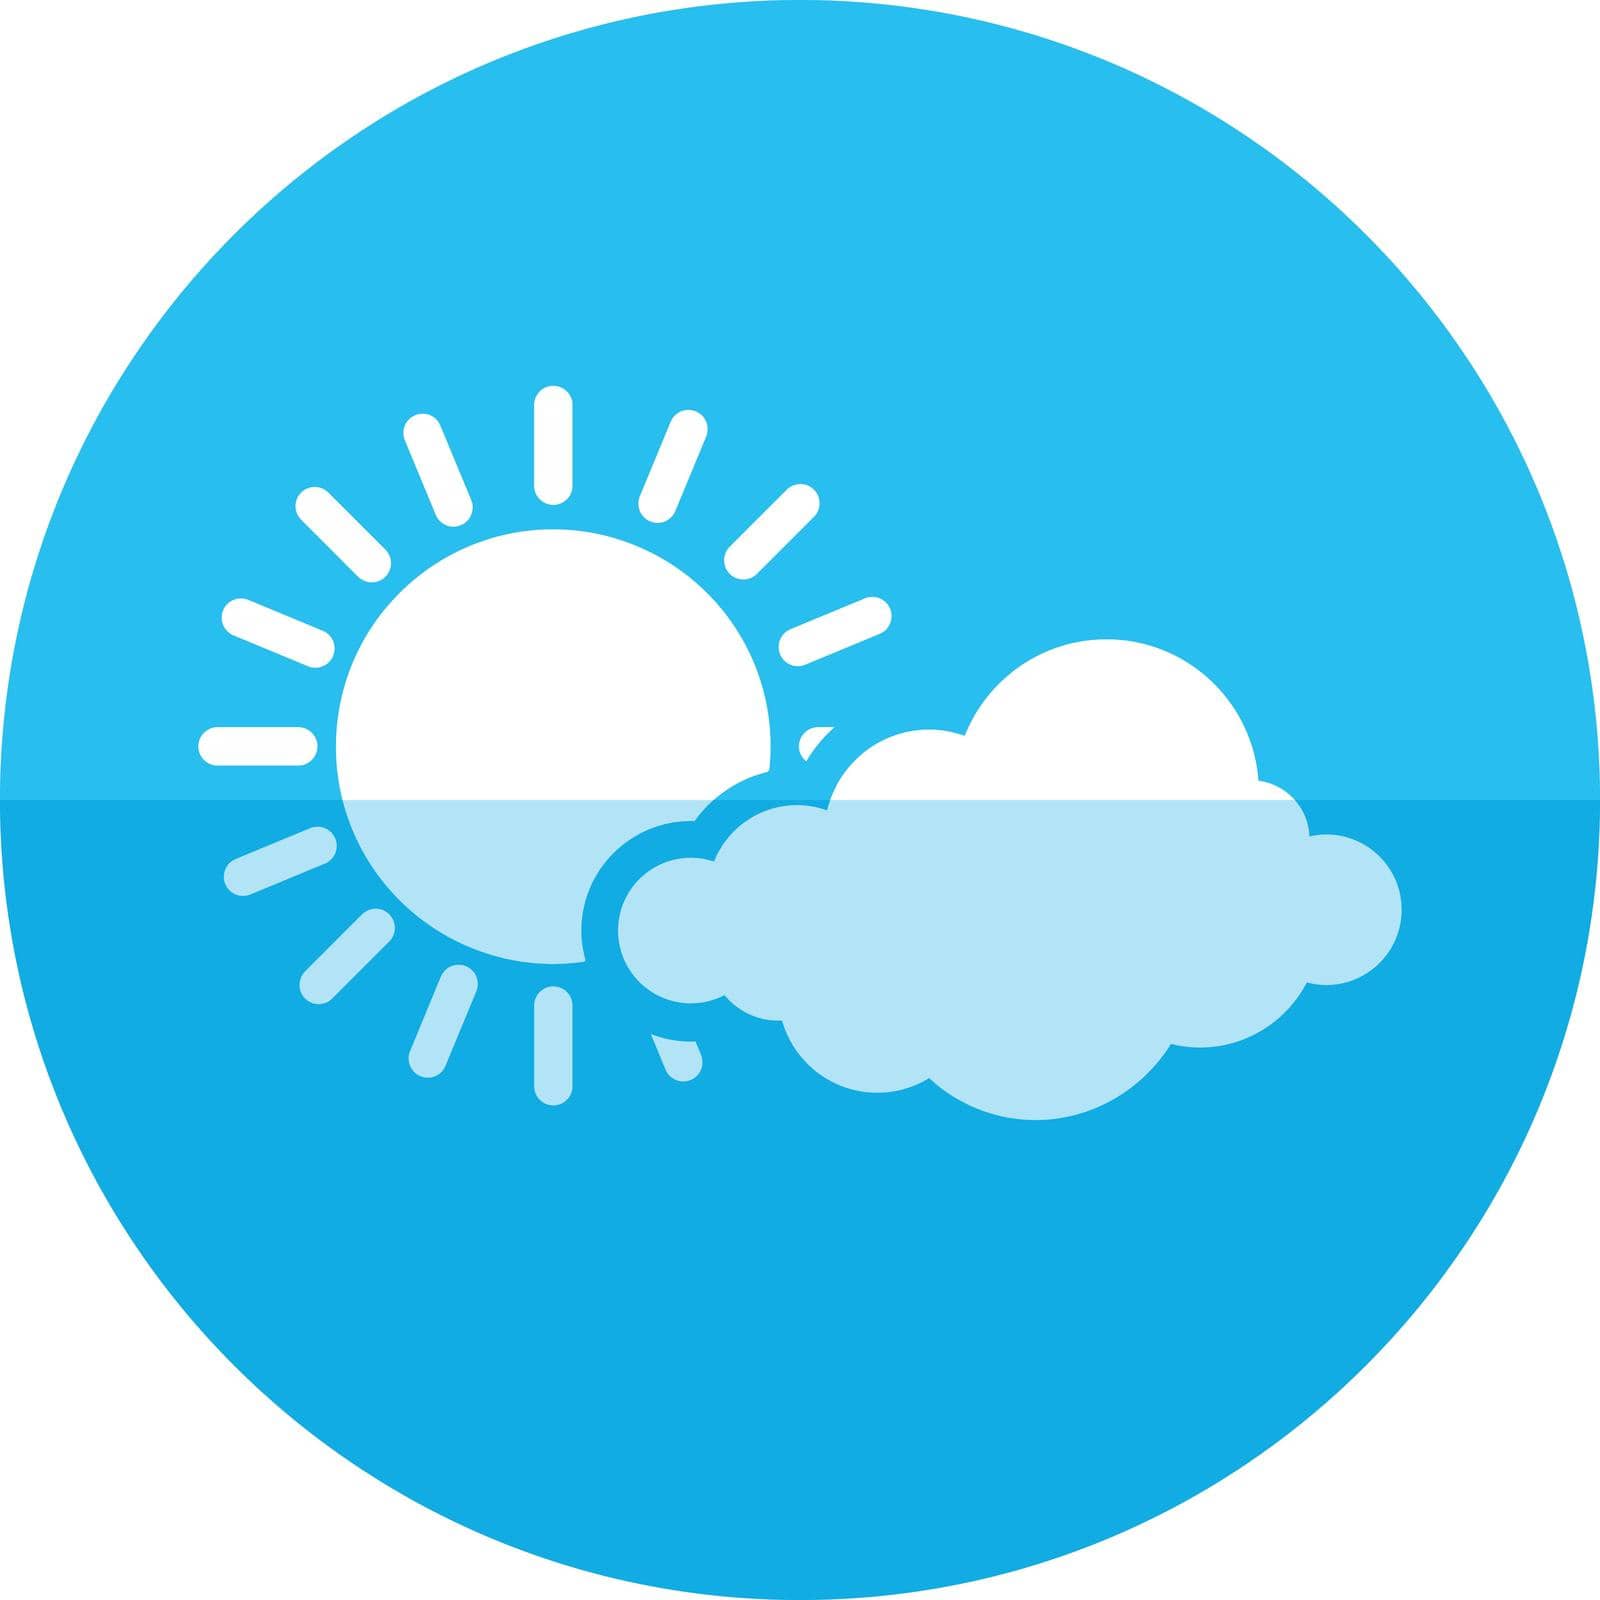 Circle icon - Forecast partly cloudy by puruan